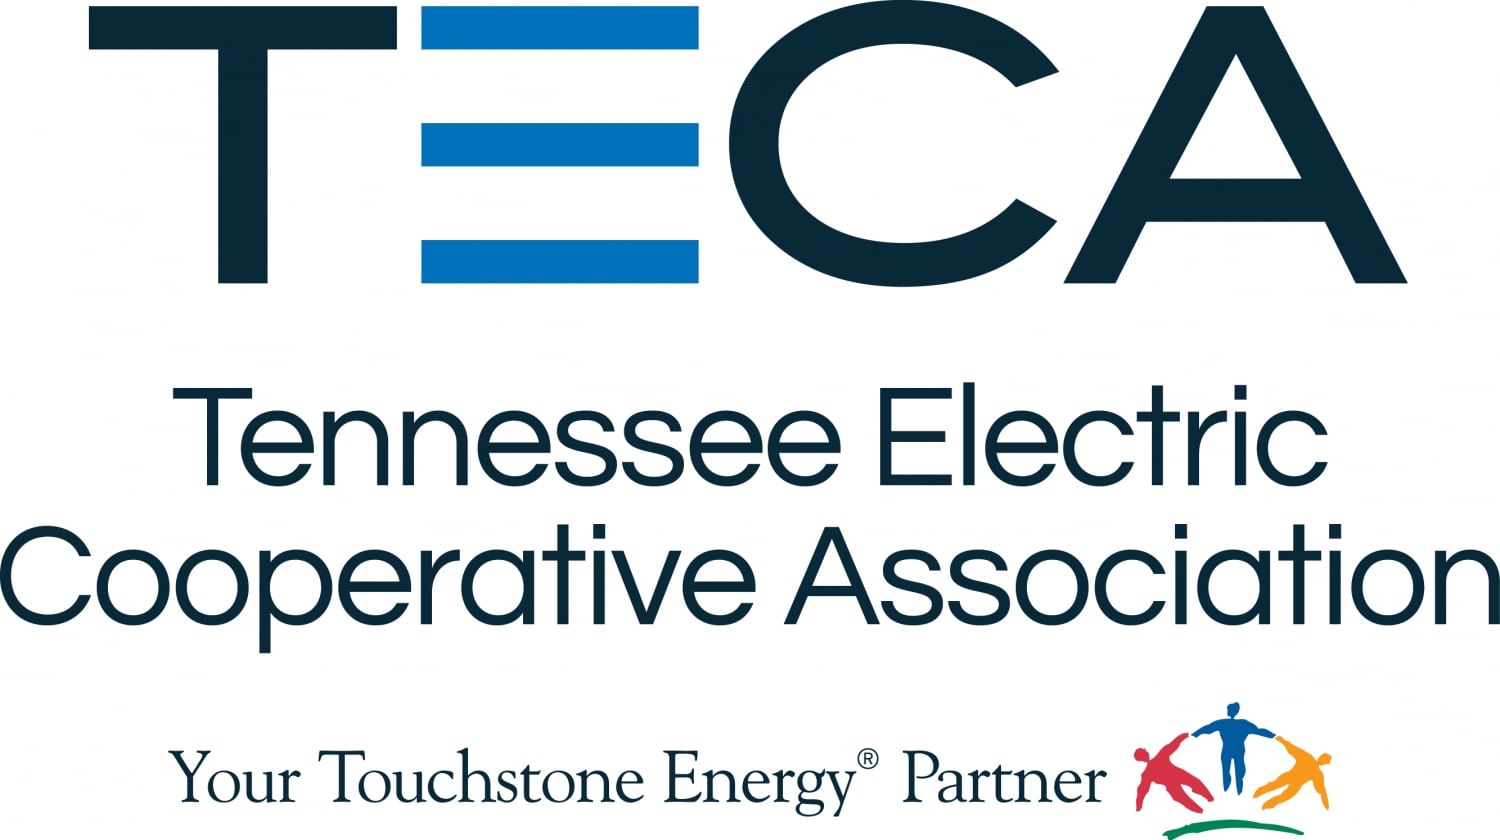 Avoiding Outlet Overload - Tennessee Electric Cooperative Association